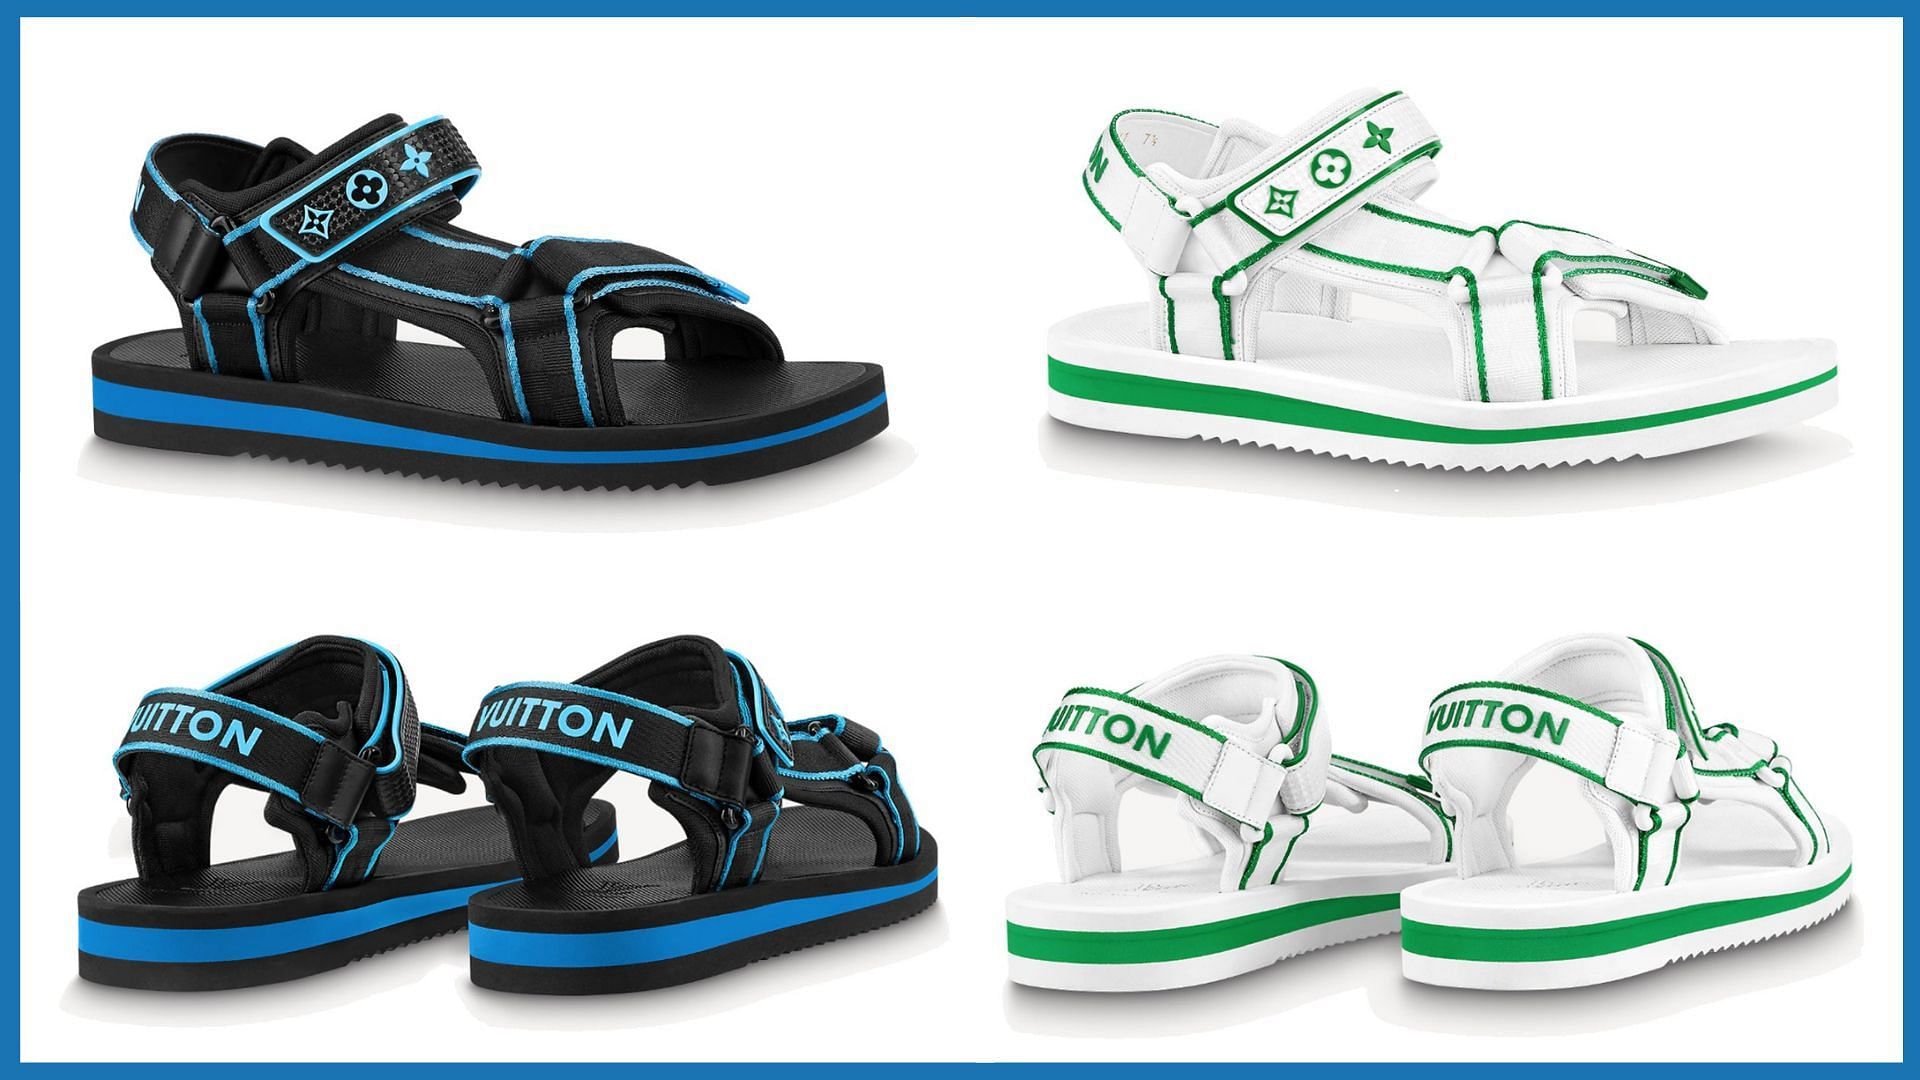 Take a closer look at the two colorways of the new sandals (Image via Sportskeeda)